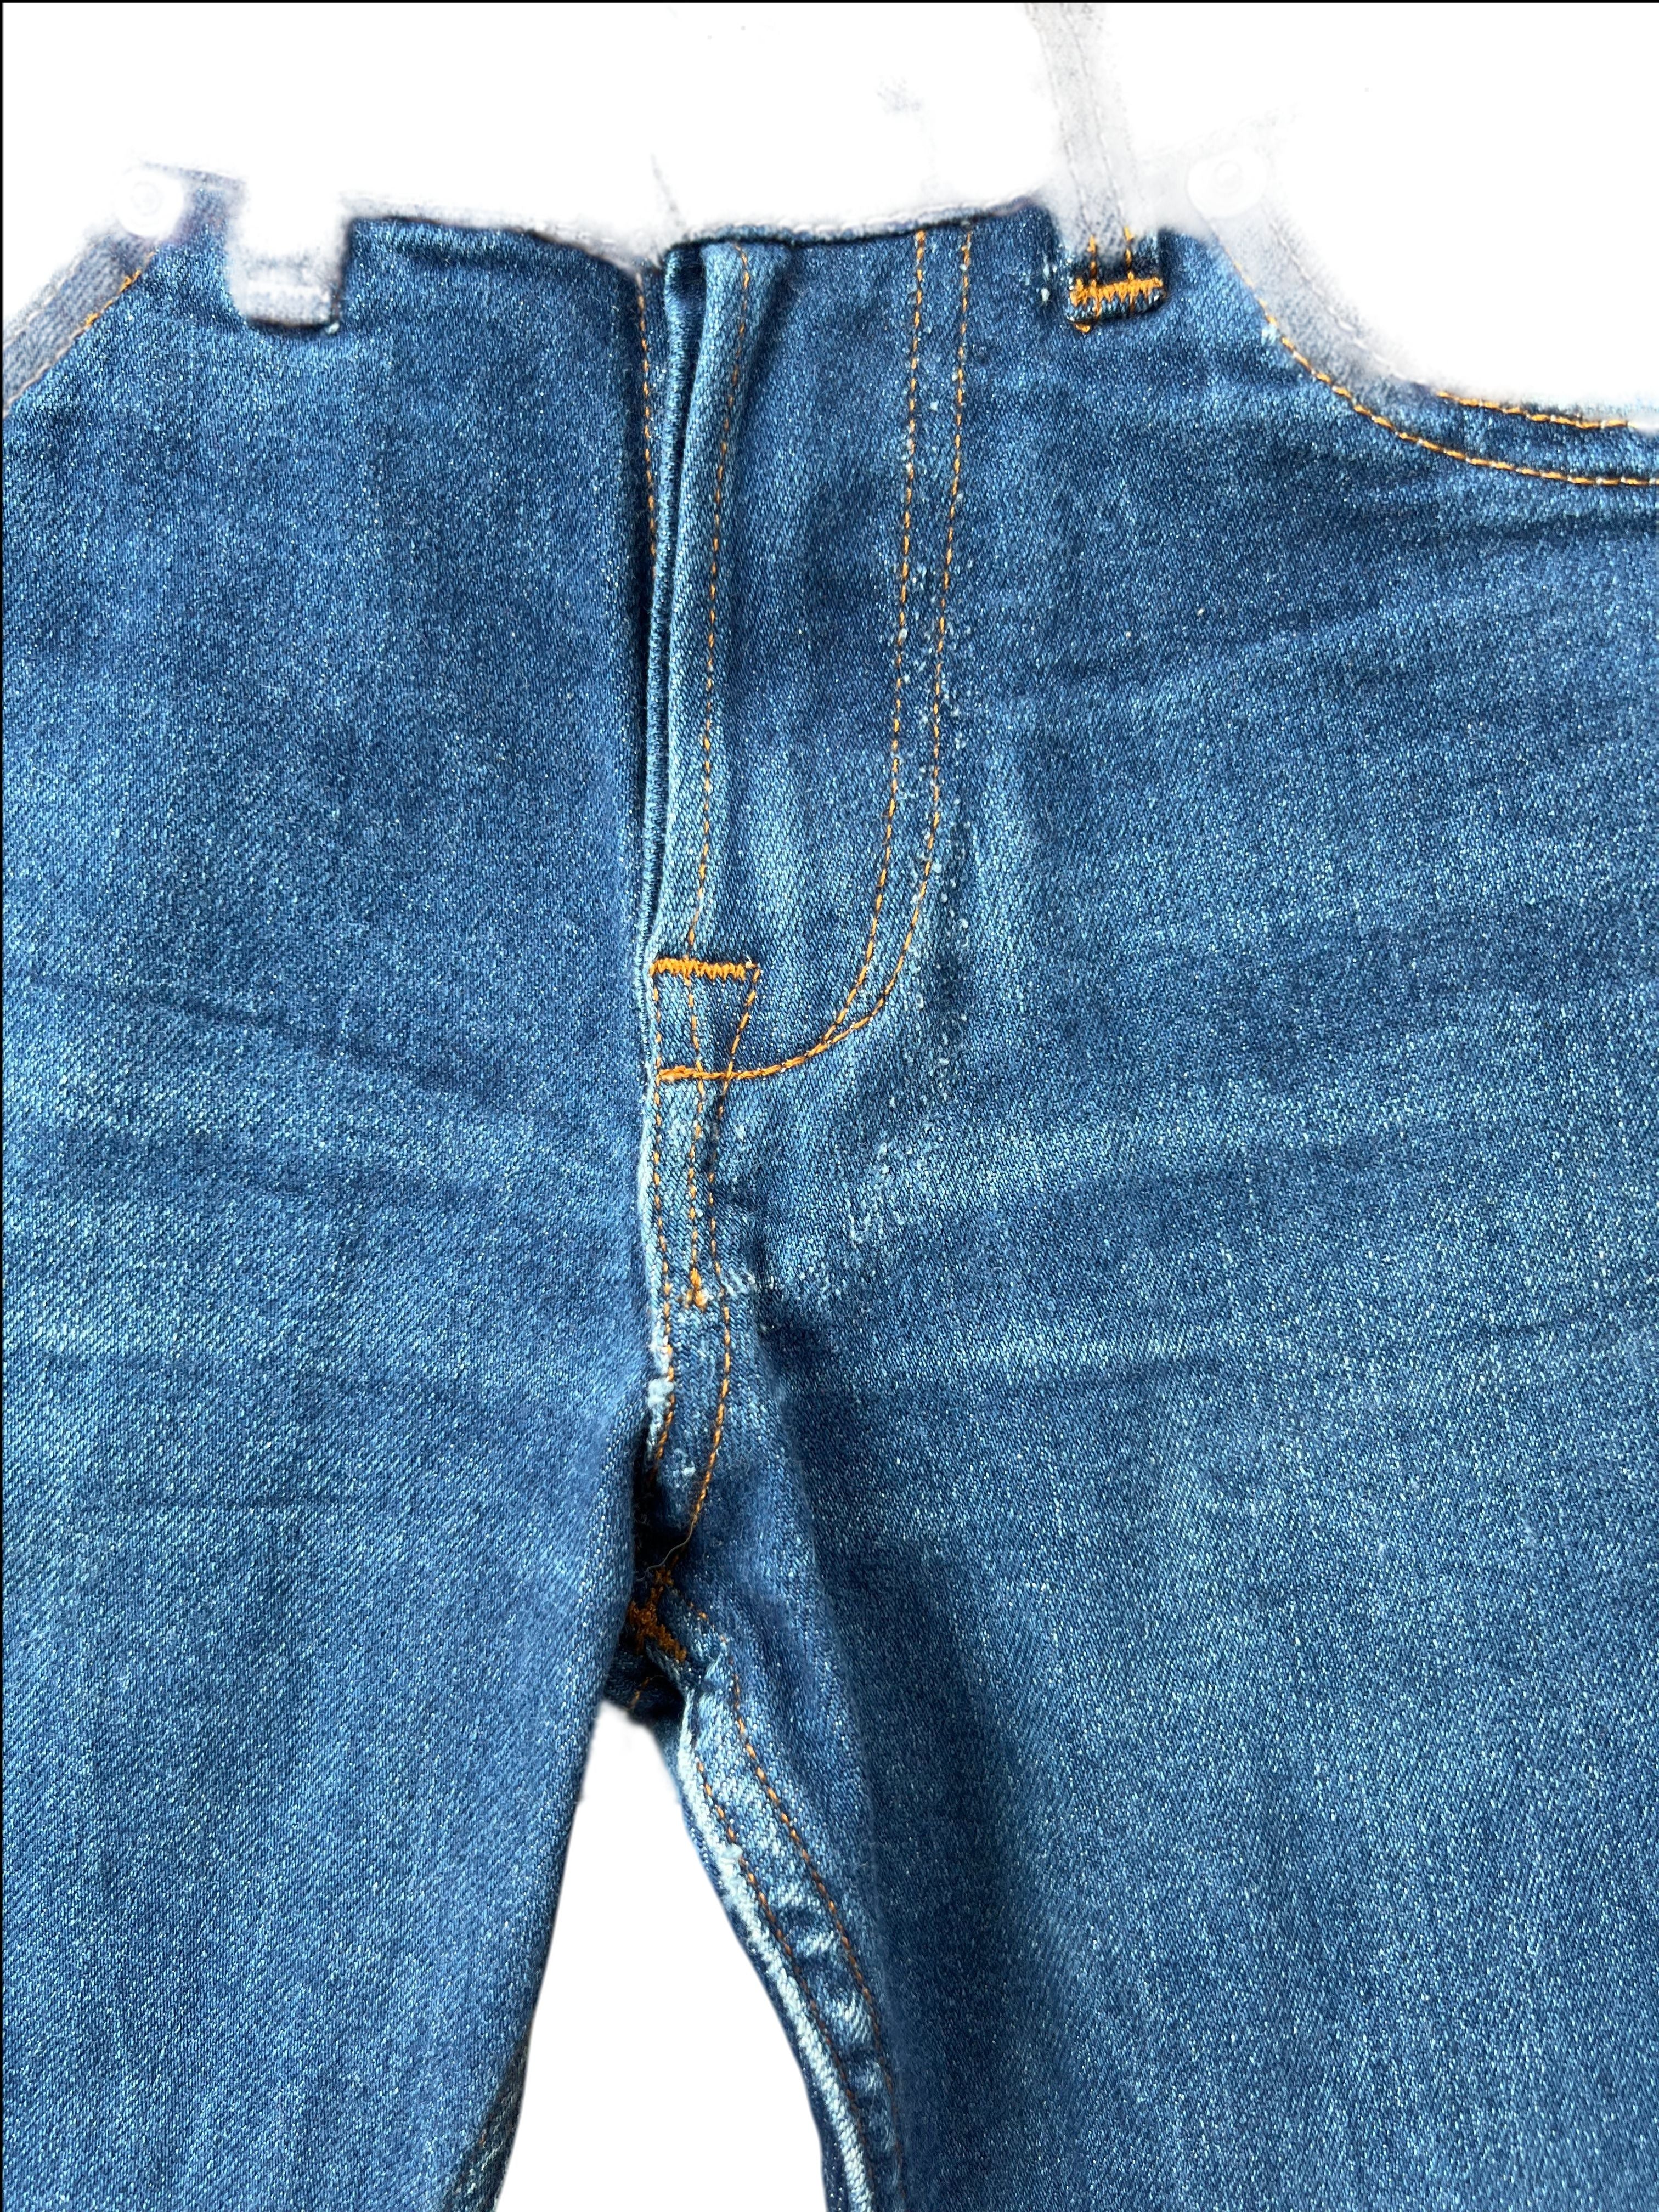 John Ireland Sustainable Jeans , some piling near zip  Size is an Estimate